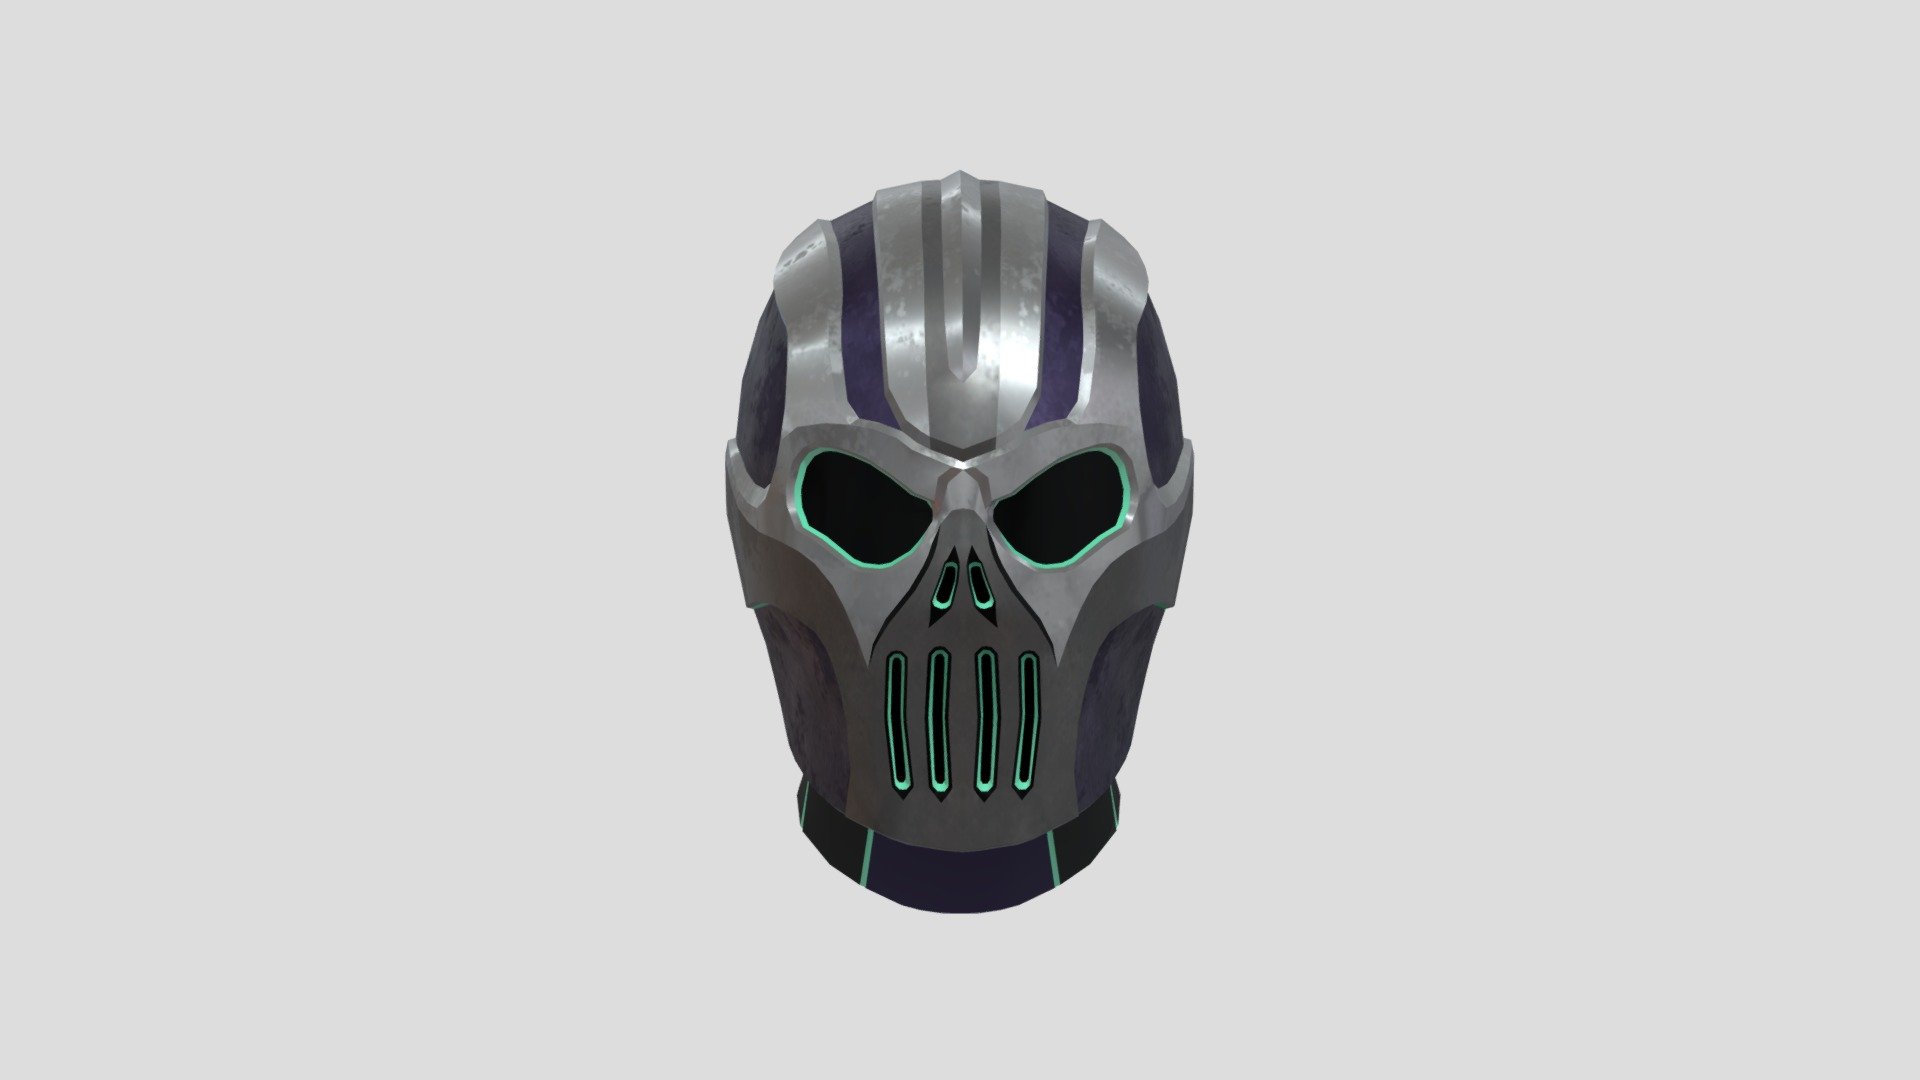 Apocalypse Ballistic Mask for the Vanu Sovereignty on Planetside 2.
Avalible in game now - Planetside 2 Apocalypse Ballistic Mask - 3D model by Jeff Kratzer (G1ngerBoy) (@G1ngerBoy) 3d model